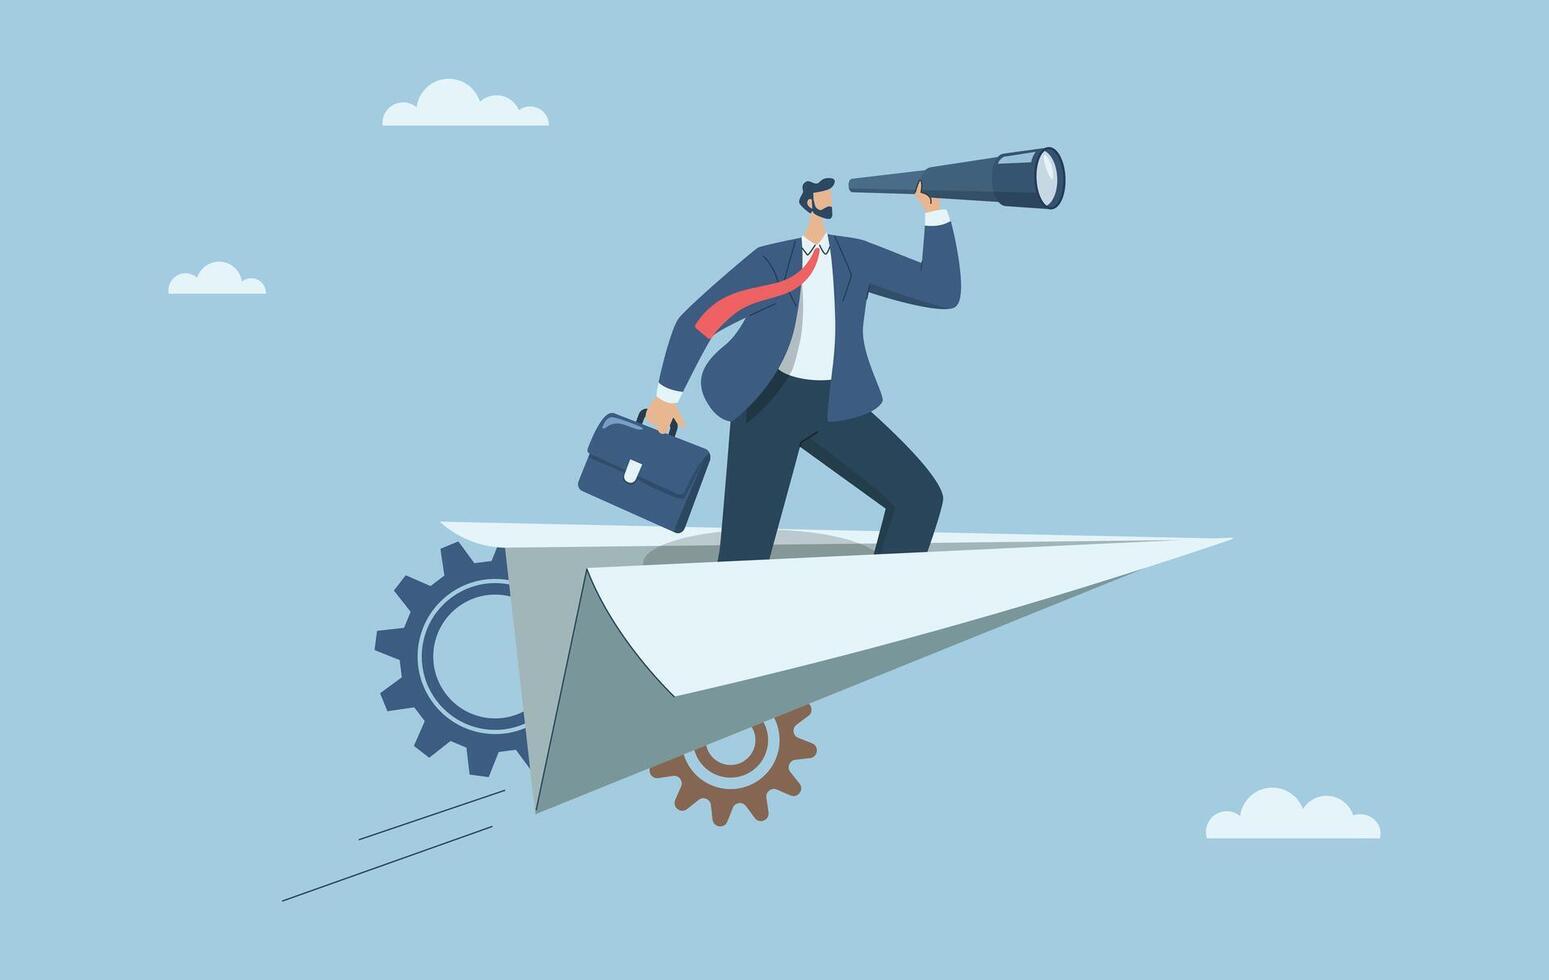 Business leaders search for business opportunities, Look ahead, Forecast future investments or discover new ideas, Businessman with binoculars on paper airplane in the sky. Vector design illustration